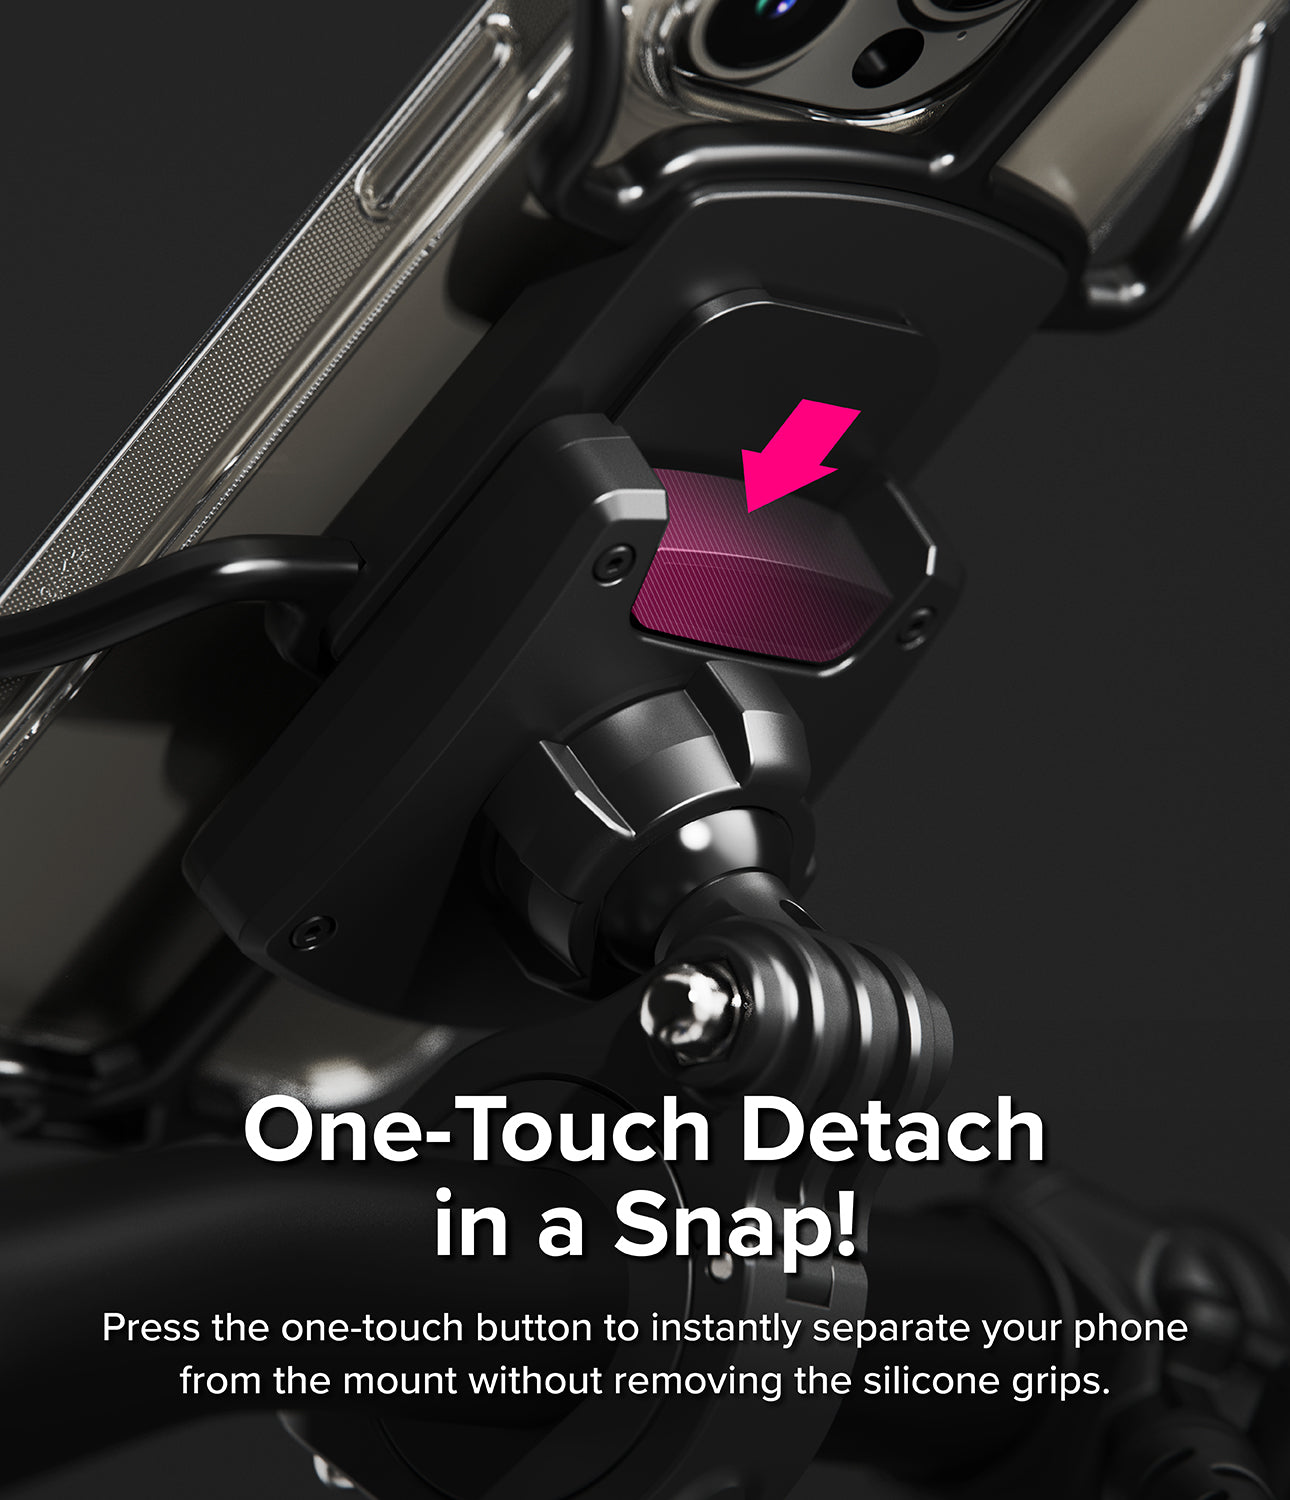 Quick & Go | Grip Bike Mount - One-Touch Detach in a Snap! Press the one-touch button to instantly separate your phone from the mount without removing the silicone grips.